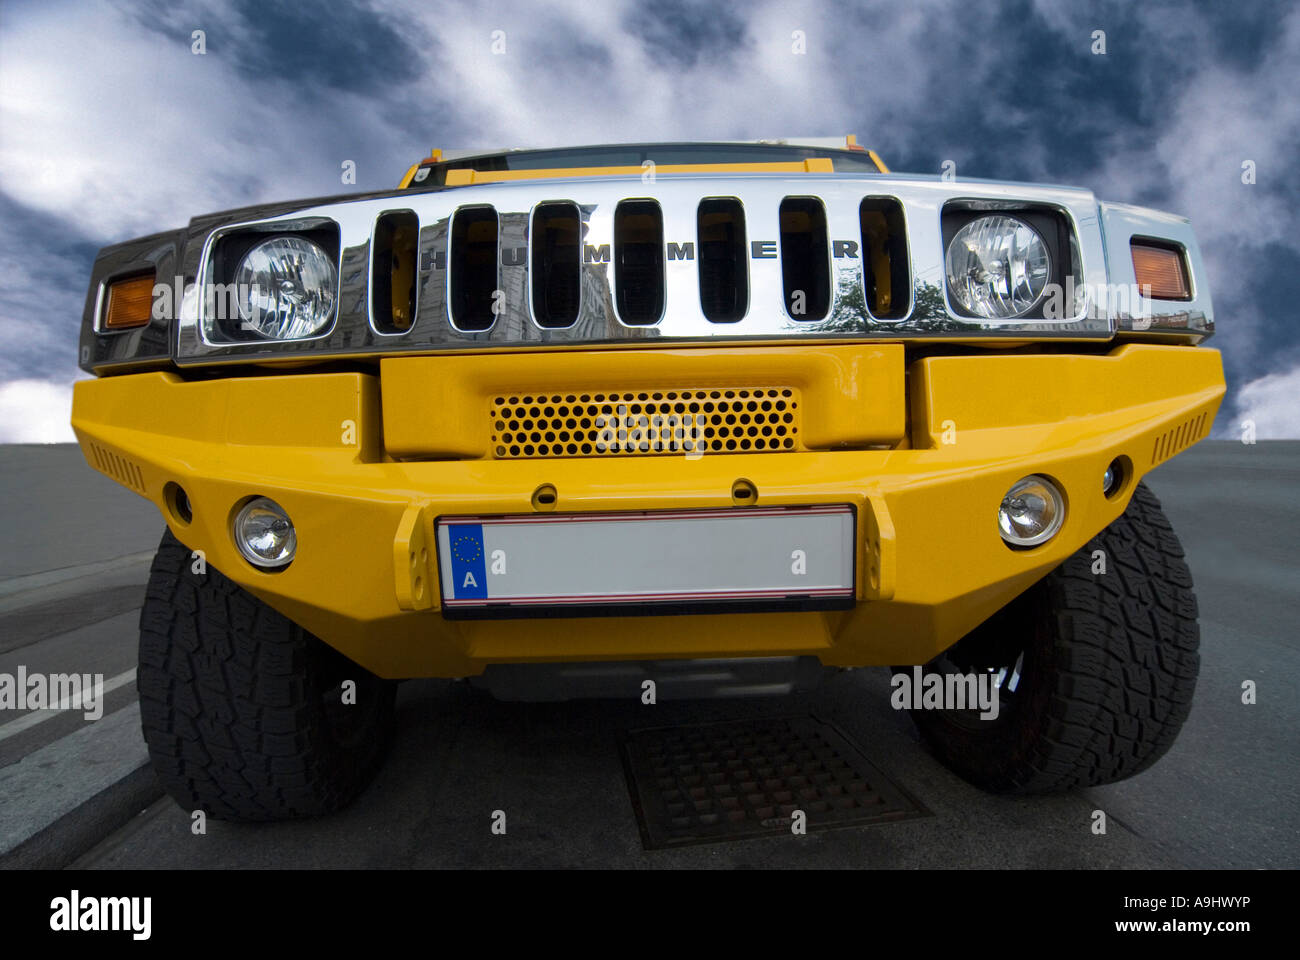 Hummer Car High Resolution Stock Photography And Images Alamy